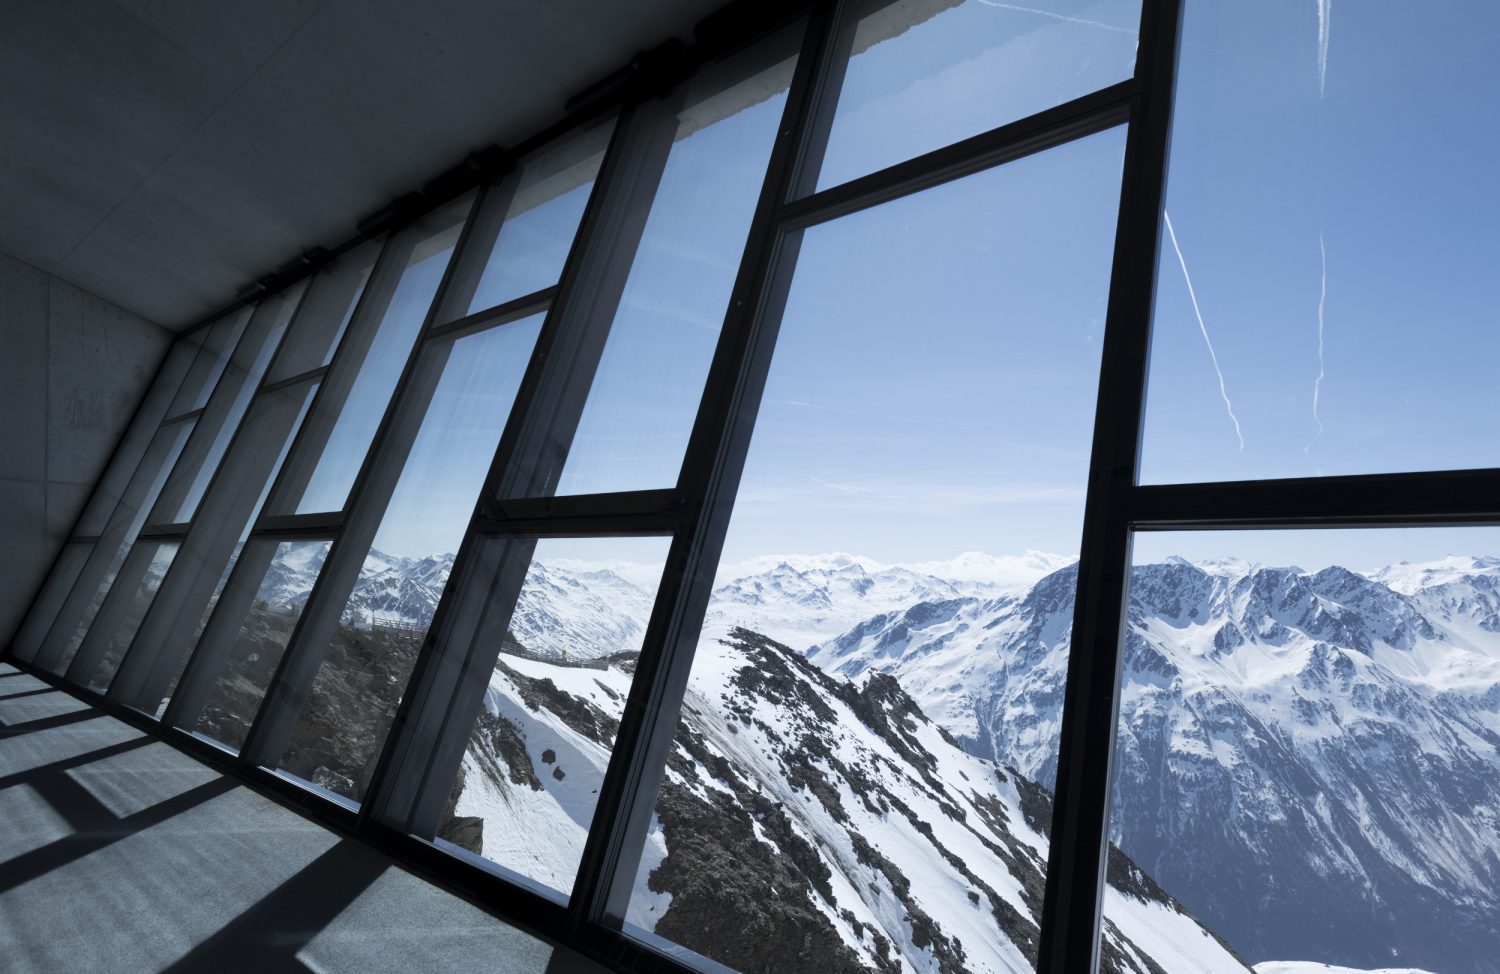 A James Bond multisensory museum is opening at the top of an Austrian mountain | Lonelyplanet